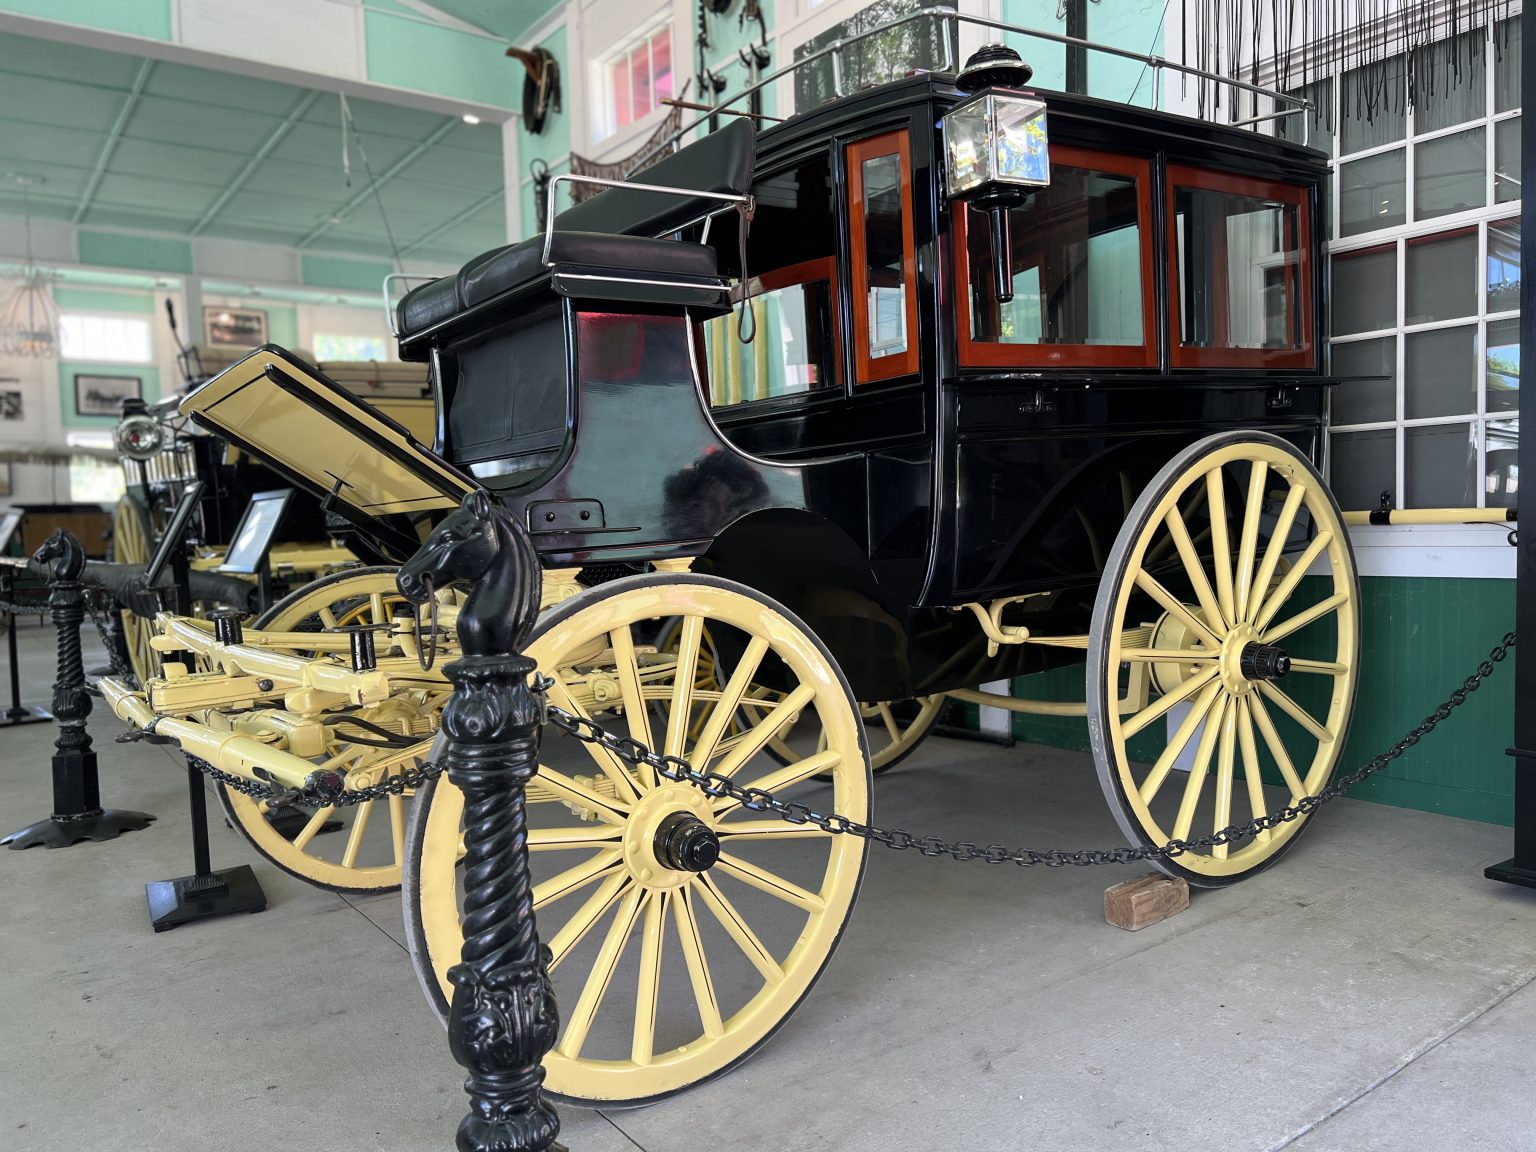 The Grand Hotel Carriage Museum is worth stopping to see. You can even climb inside one!